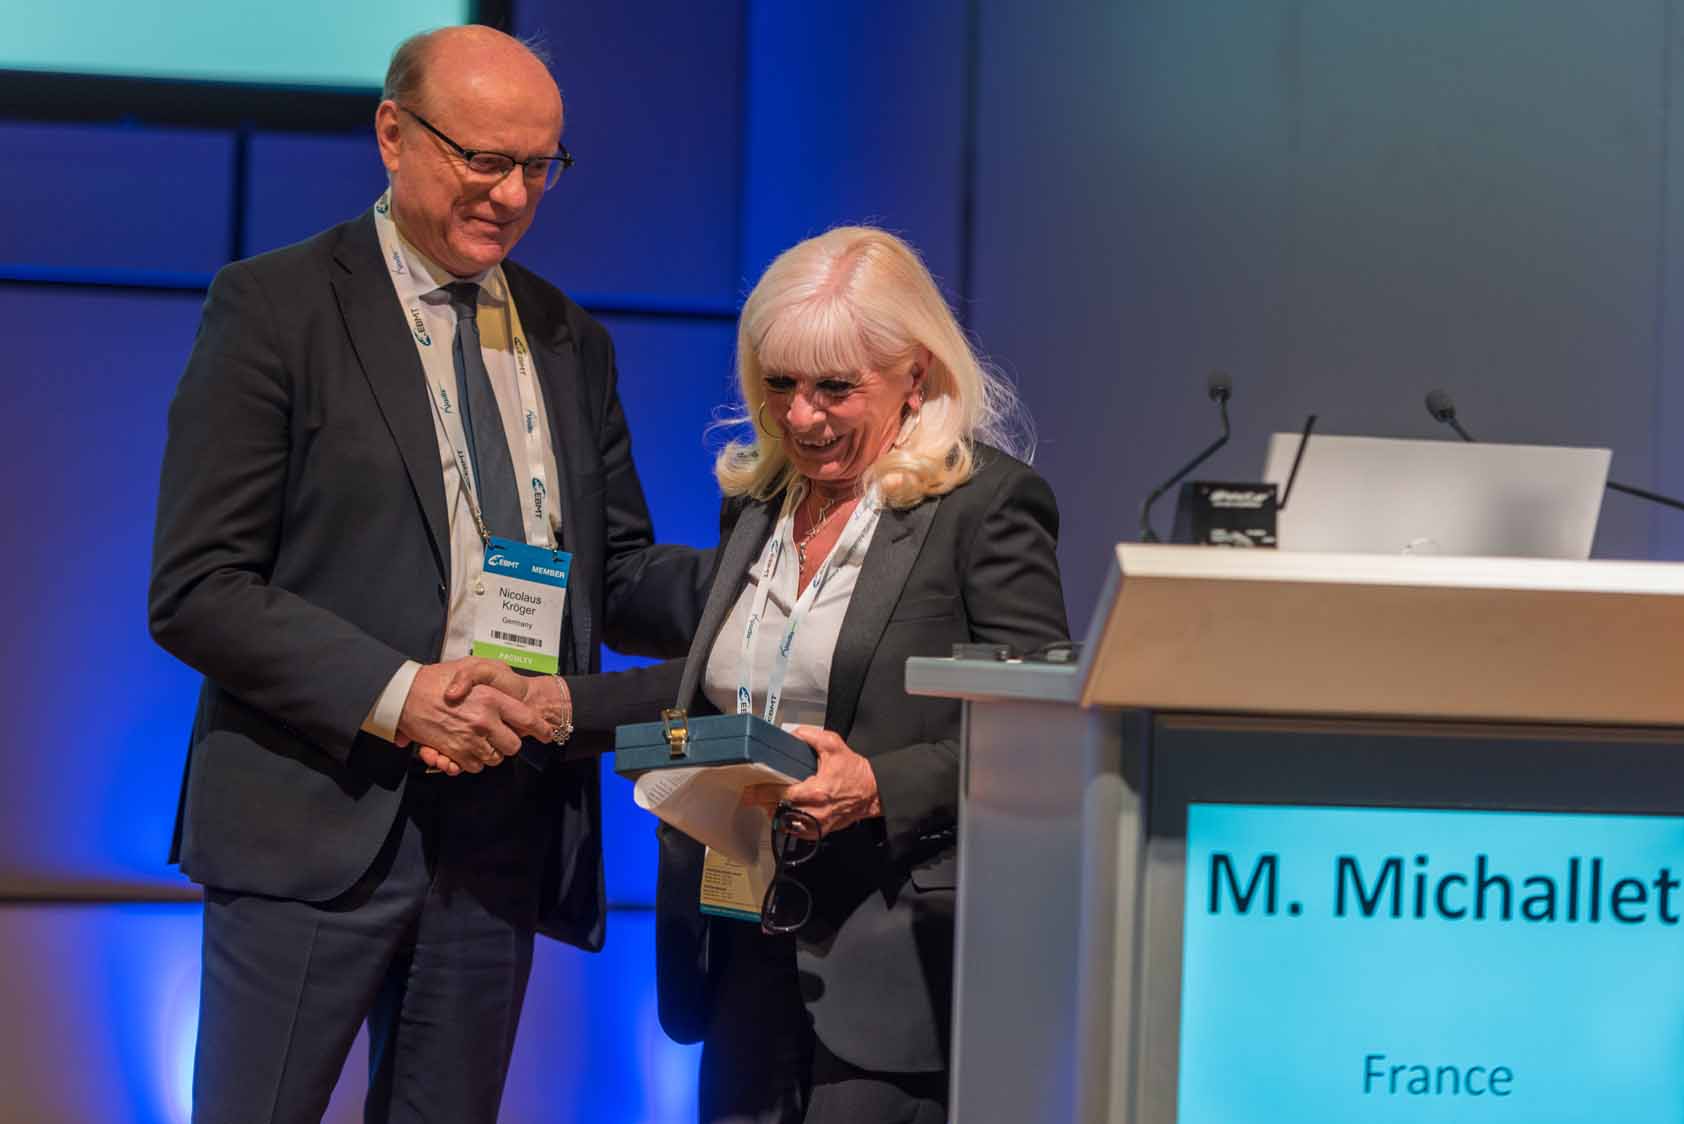 EBMT 2019 HONORARY MEMBERS Mauricette Michallet